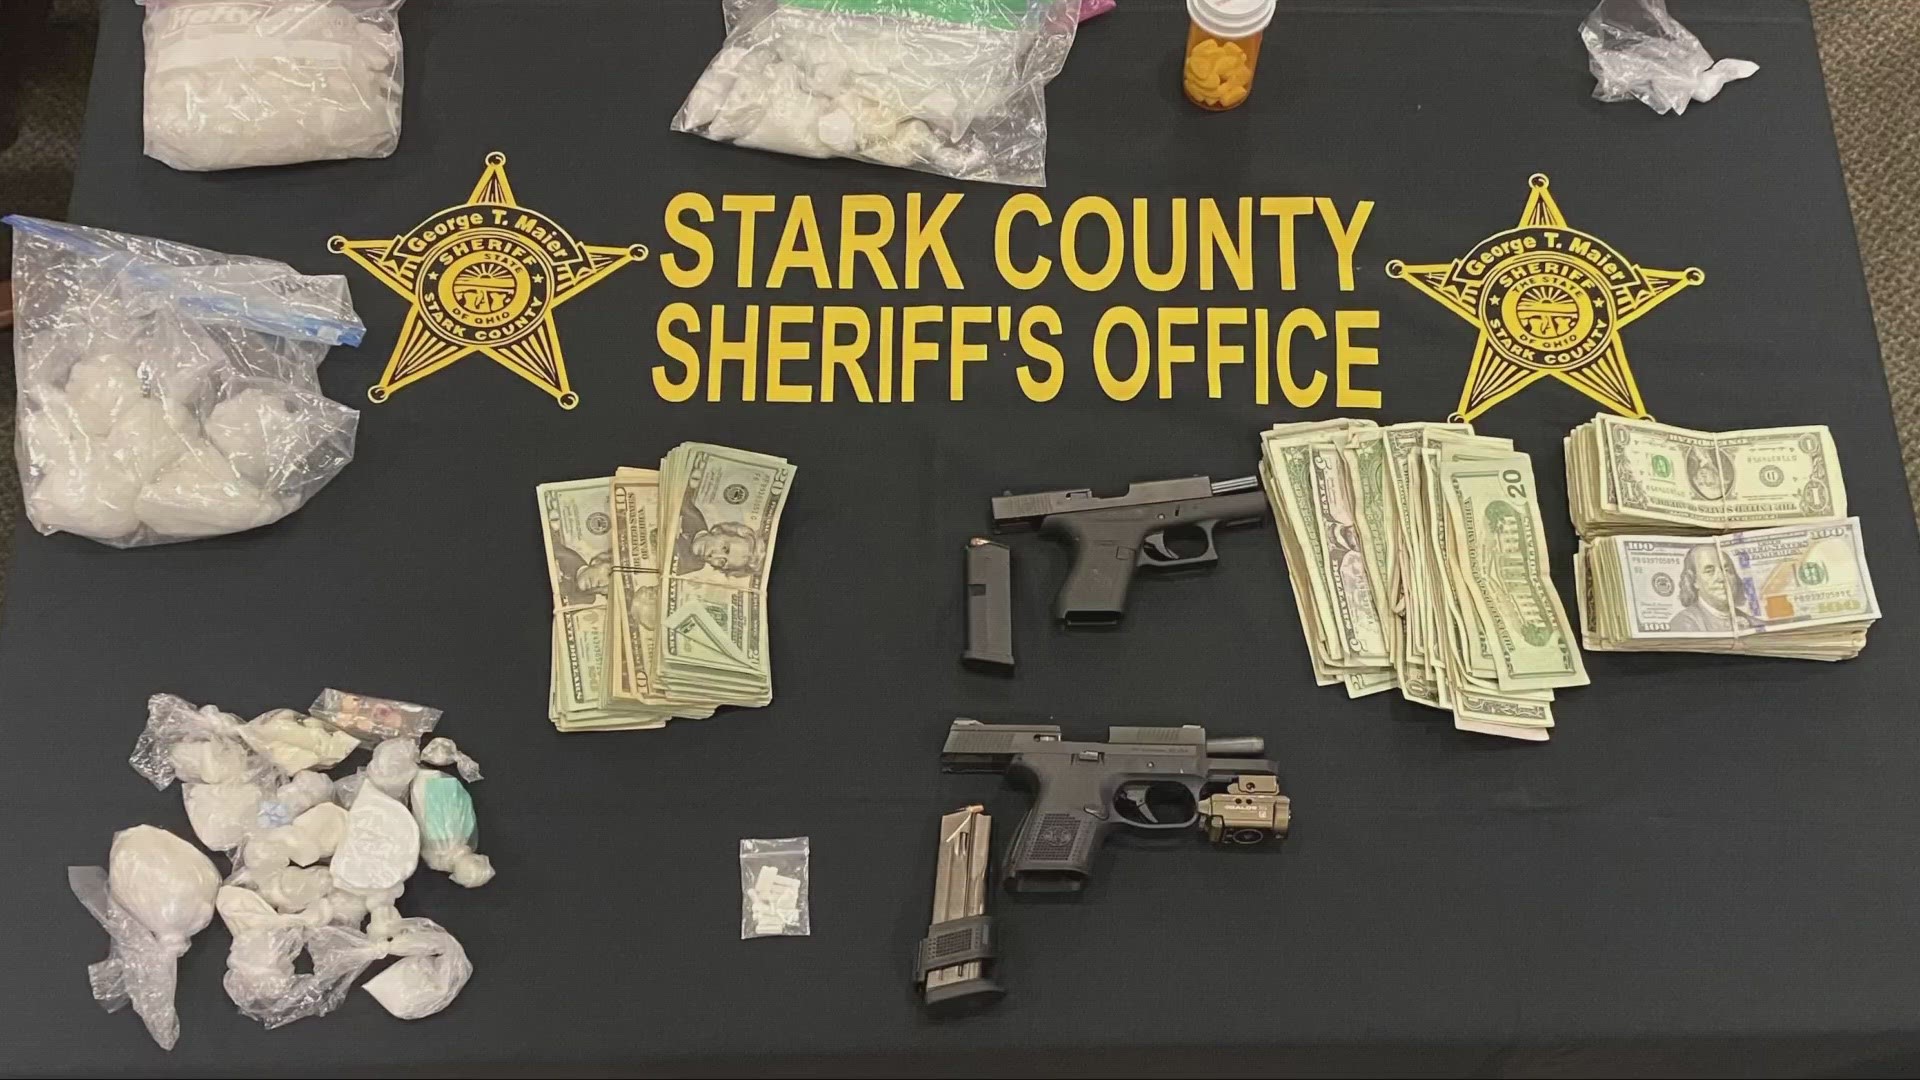 Heather Frenz of Canton is facing several felony charges after heroin, cocaine, and methamphetamine were seized by authorities with a search warrant.